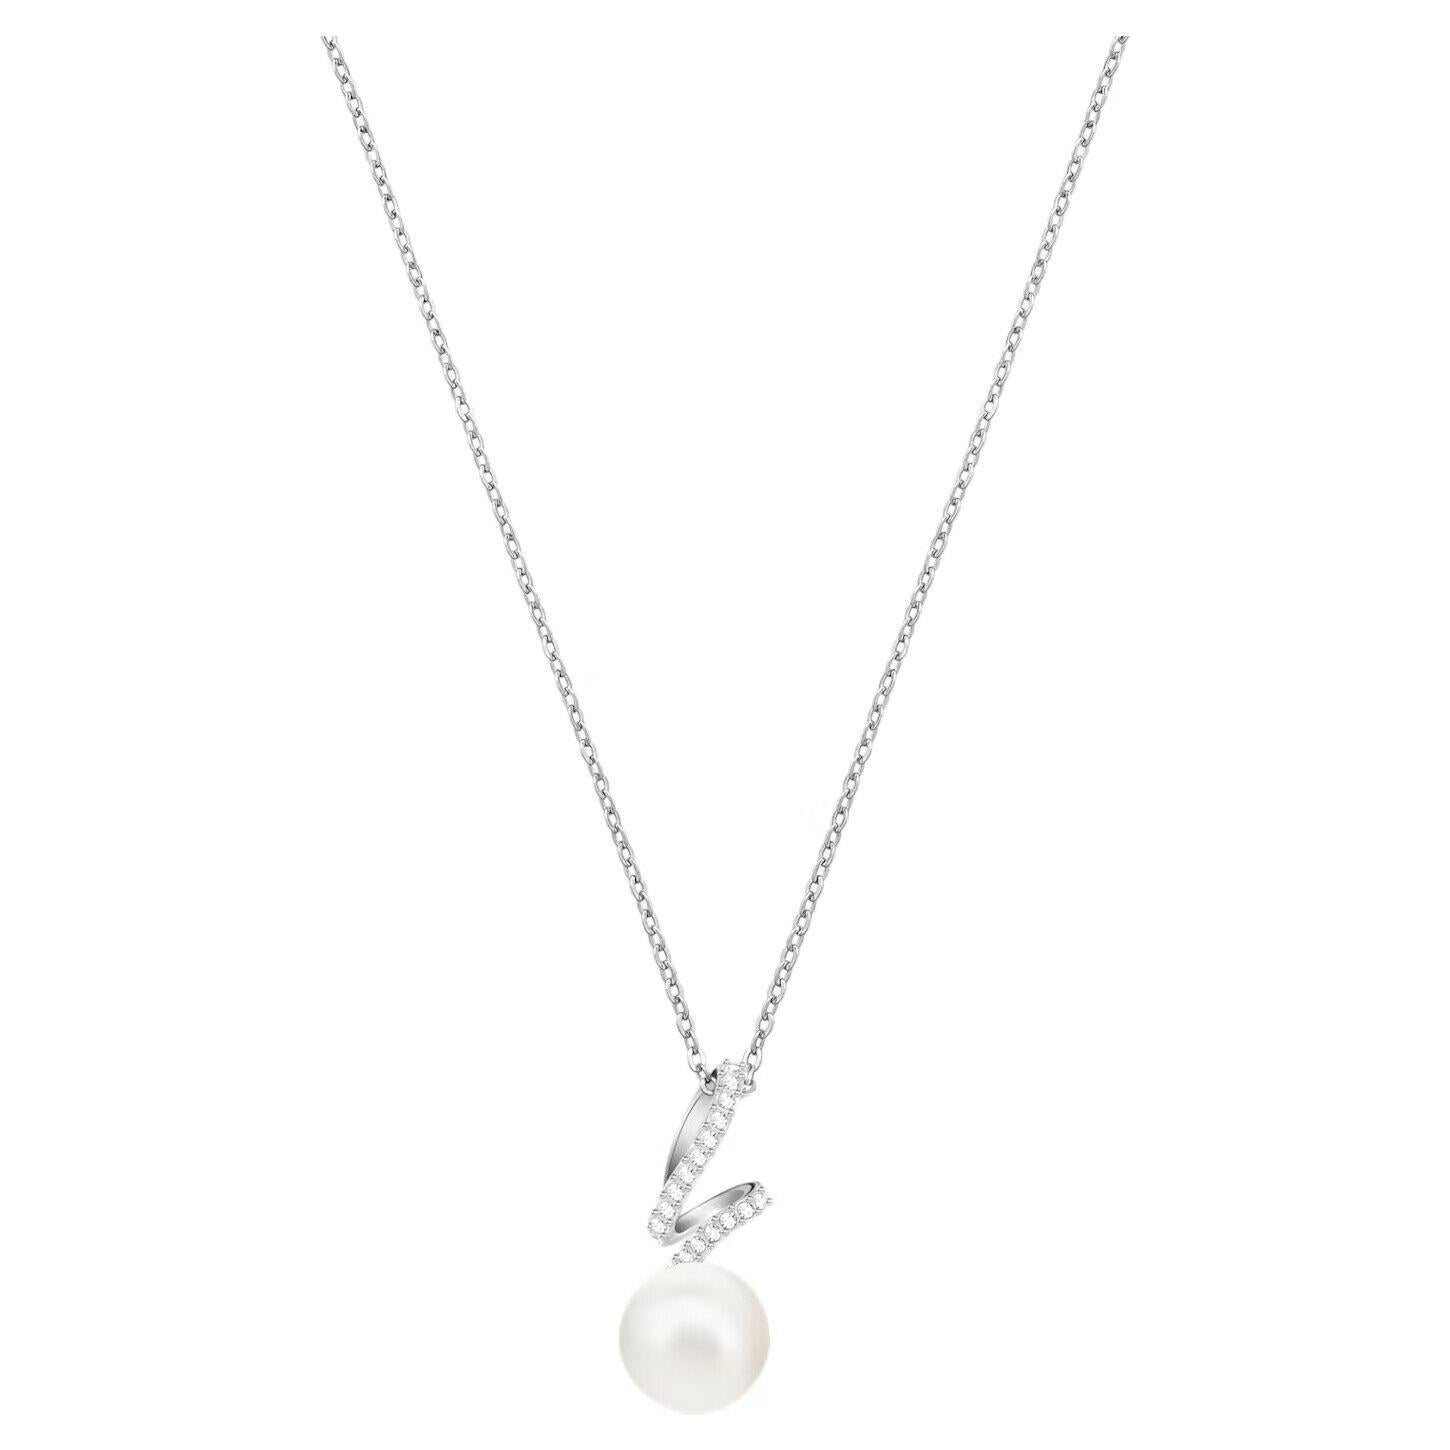 Swarovski Dangle White Round Pearl Crystals Spiral Hook Pendant Silver Necklace For Sale 6